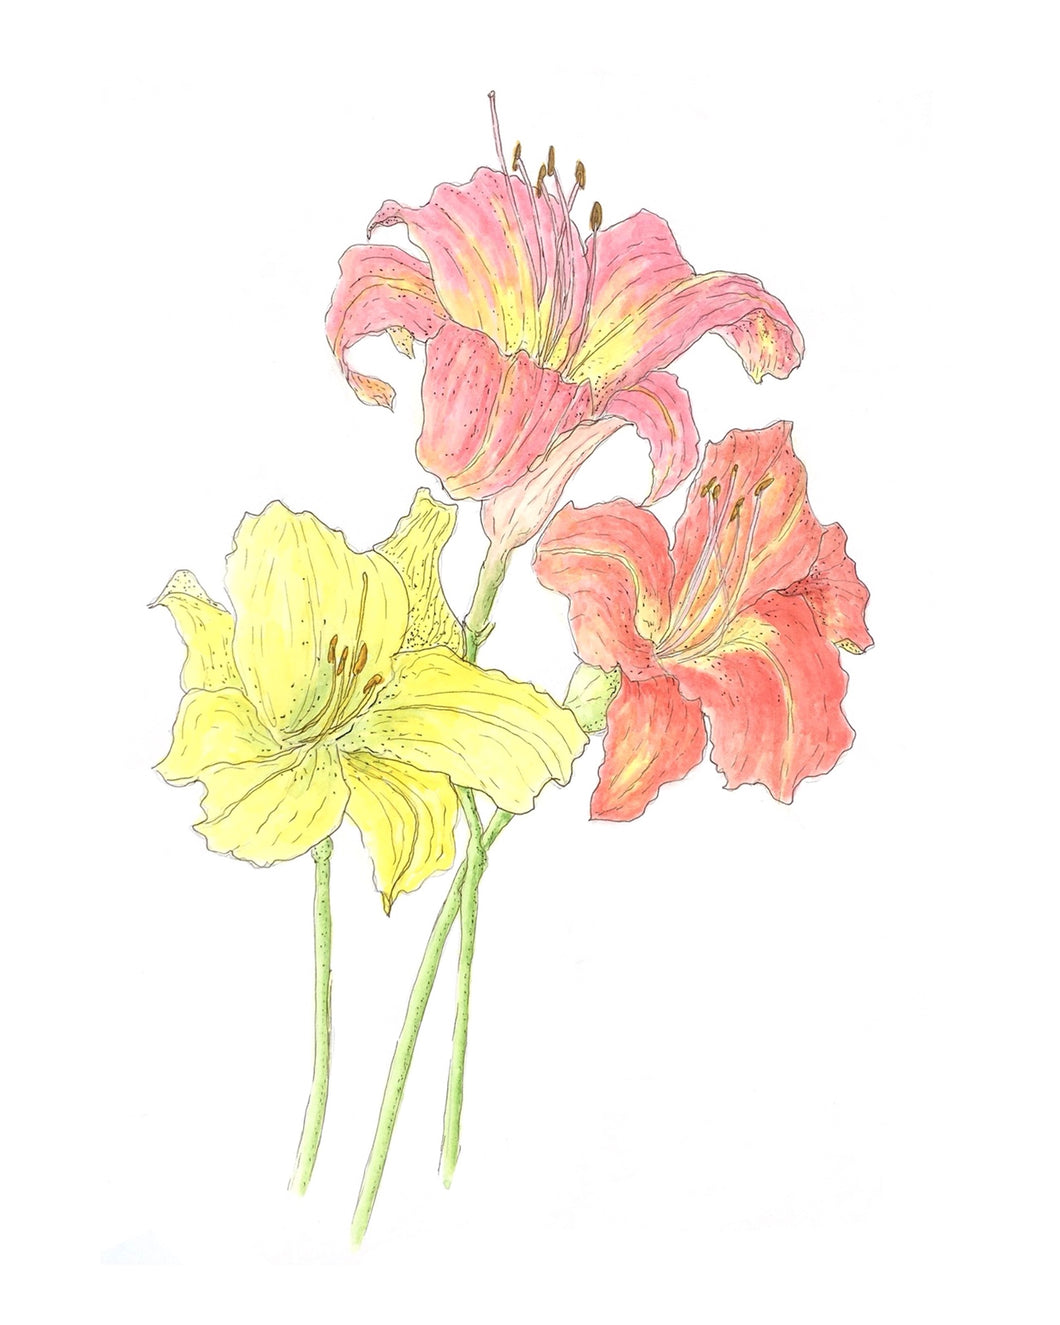 3 Lily Pen and Watercolor Sketch Print on Hahnemuhle Art Paper 8x10 matted